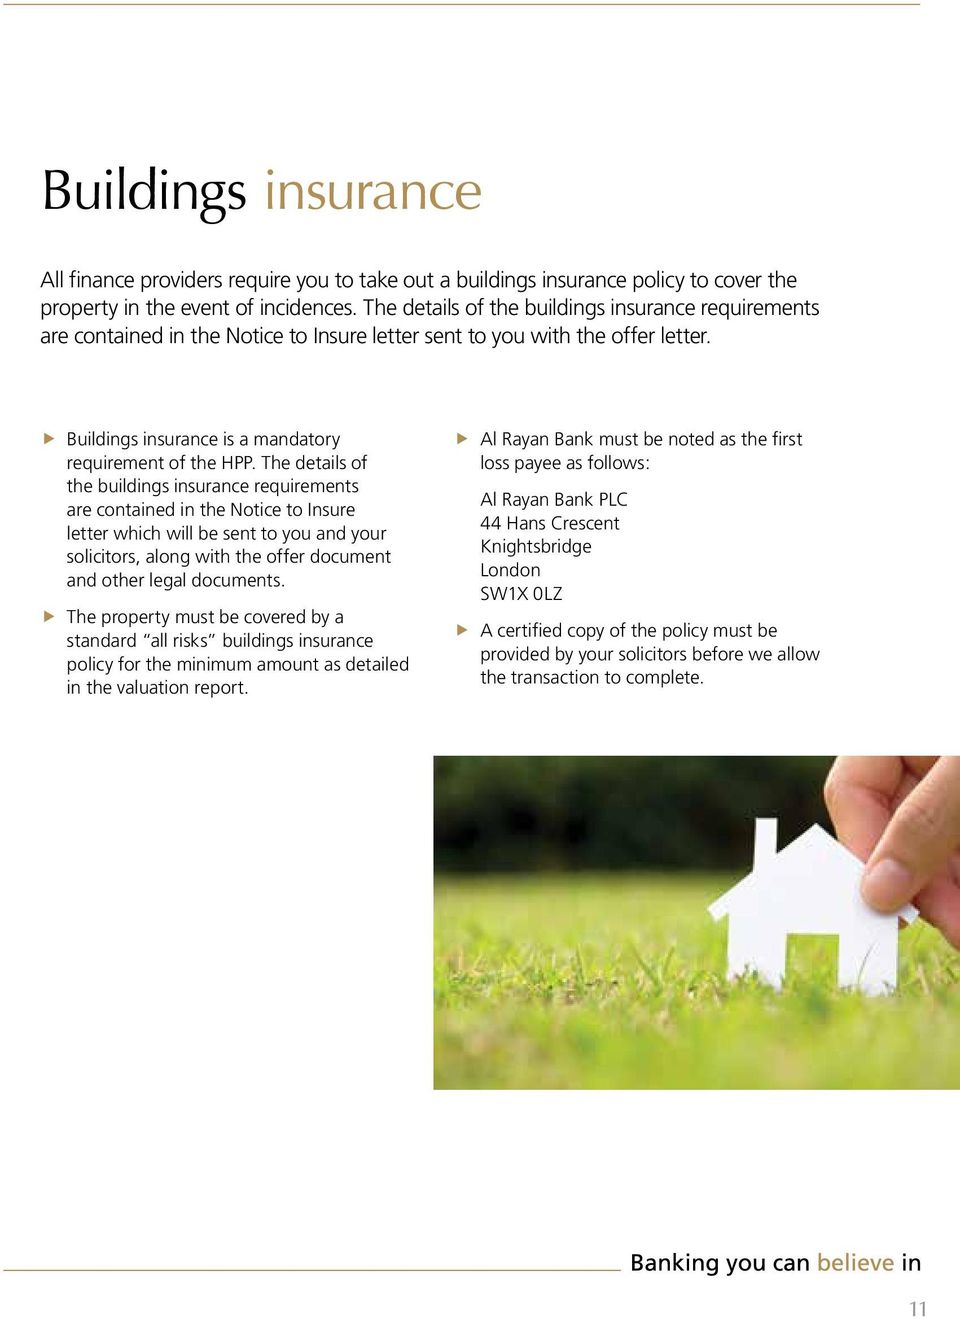 The details of the buildings insurance requirements are contained in the Notice to Insure letter which will be sent to you and your solicitors, along with the oer document and other legal documents.